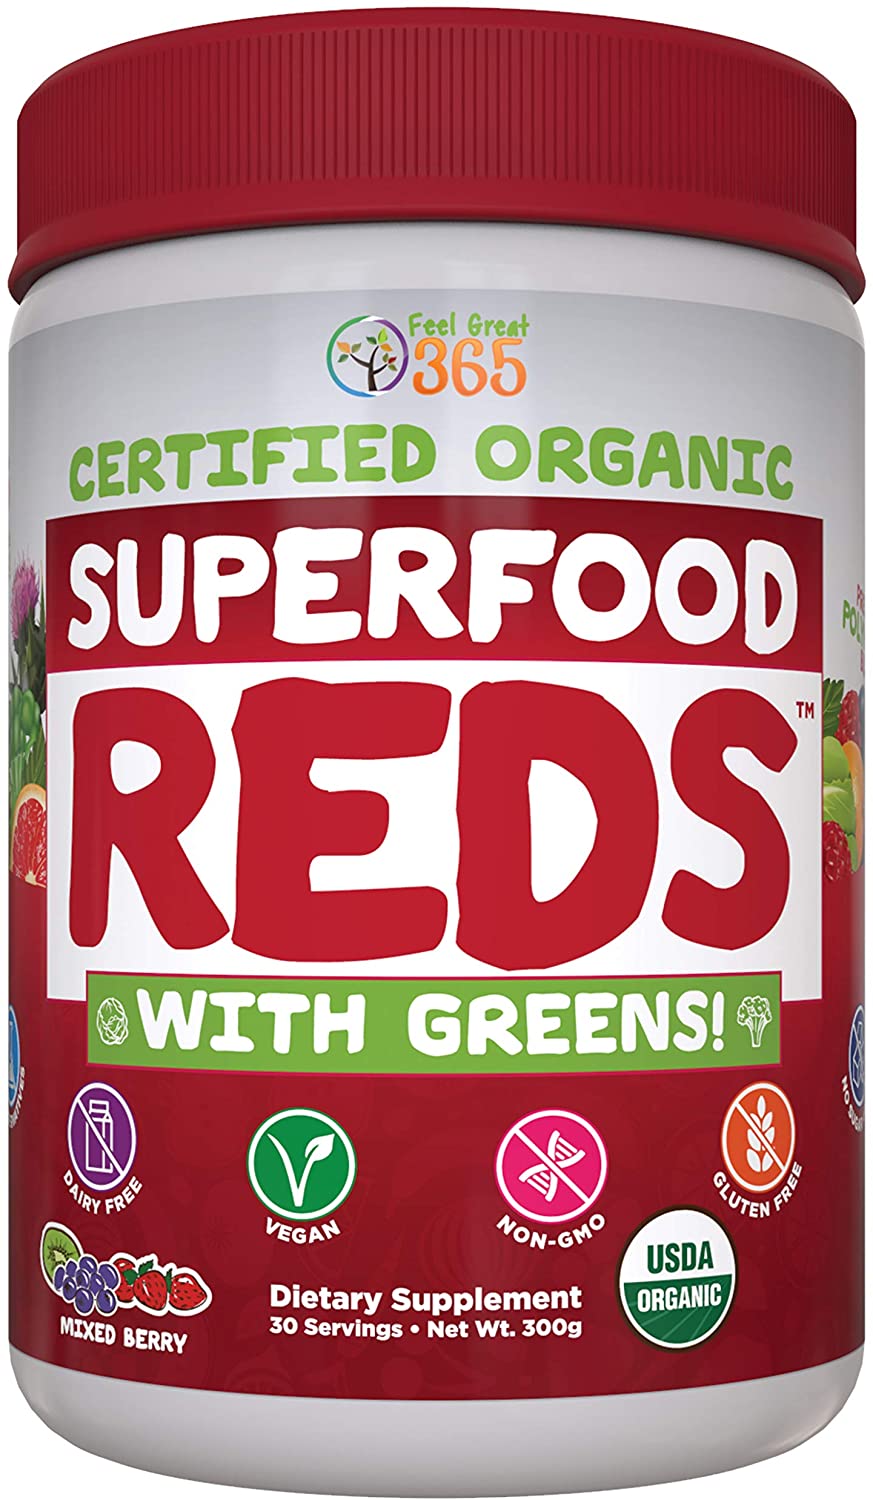 Feel Great 365 - Superfood Vital Reds with Greens Juice Powder - Fruit and Vegetable Supplements Top 10 best fruit supplements